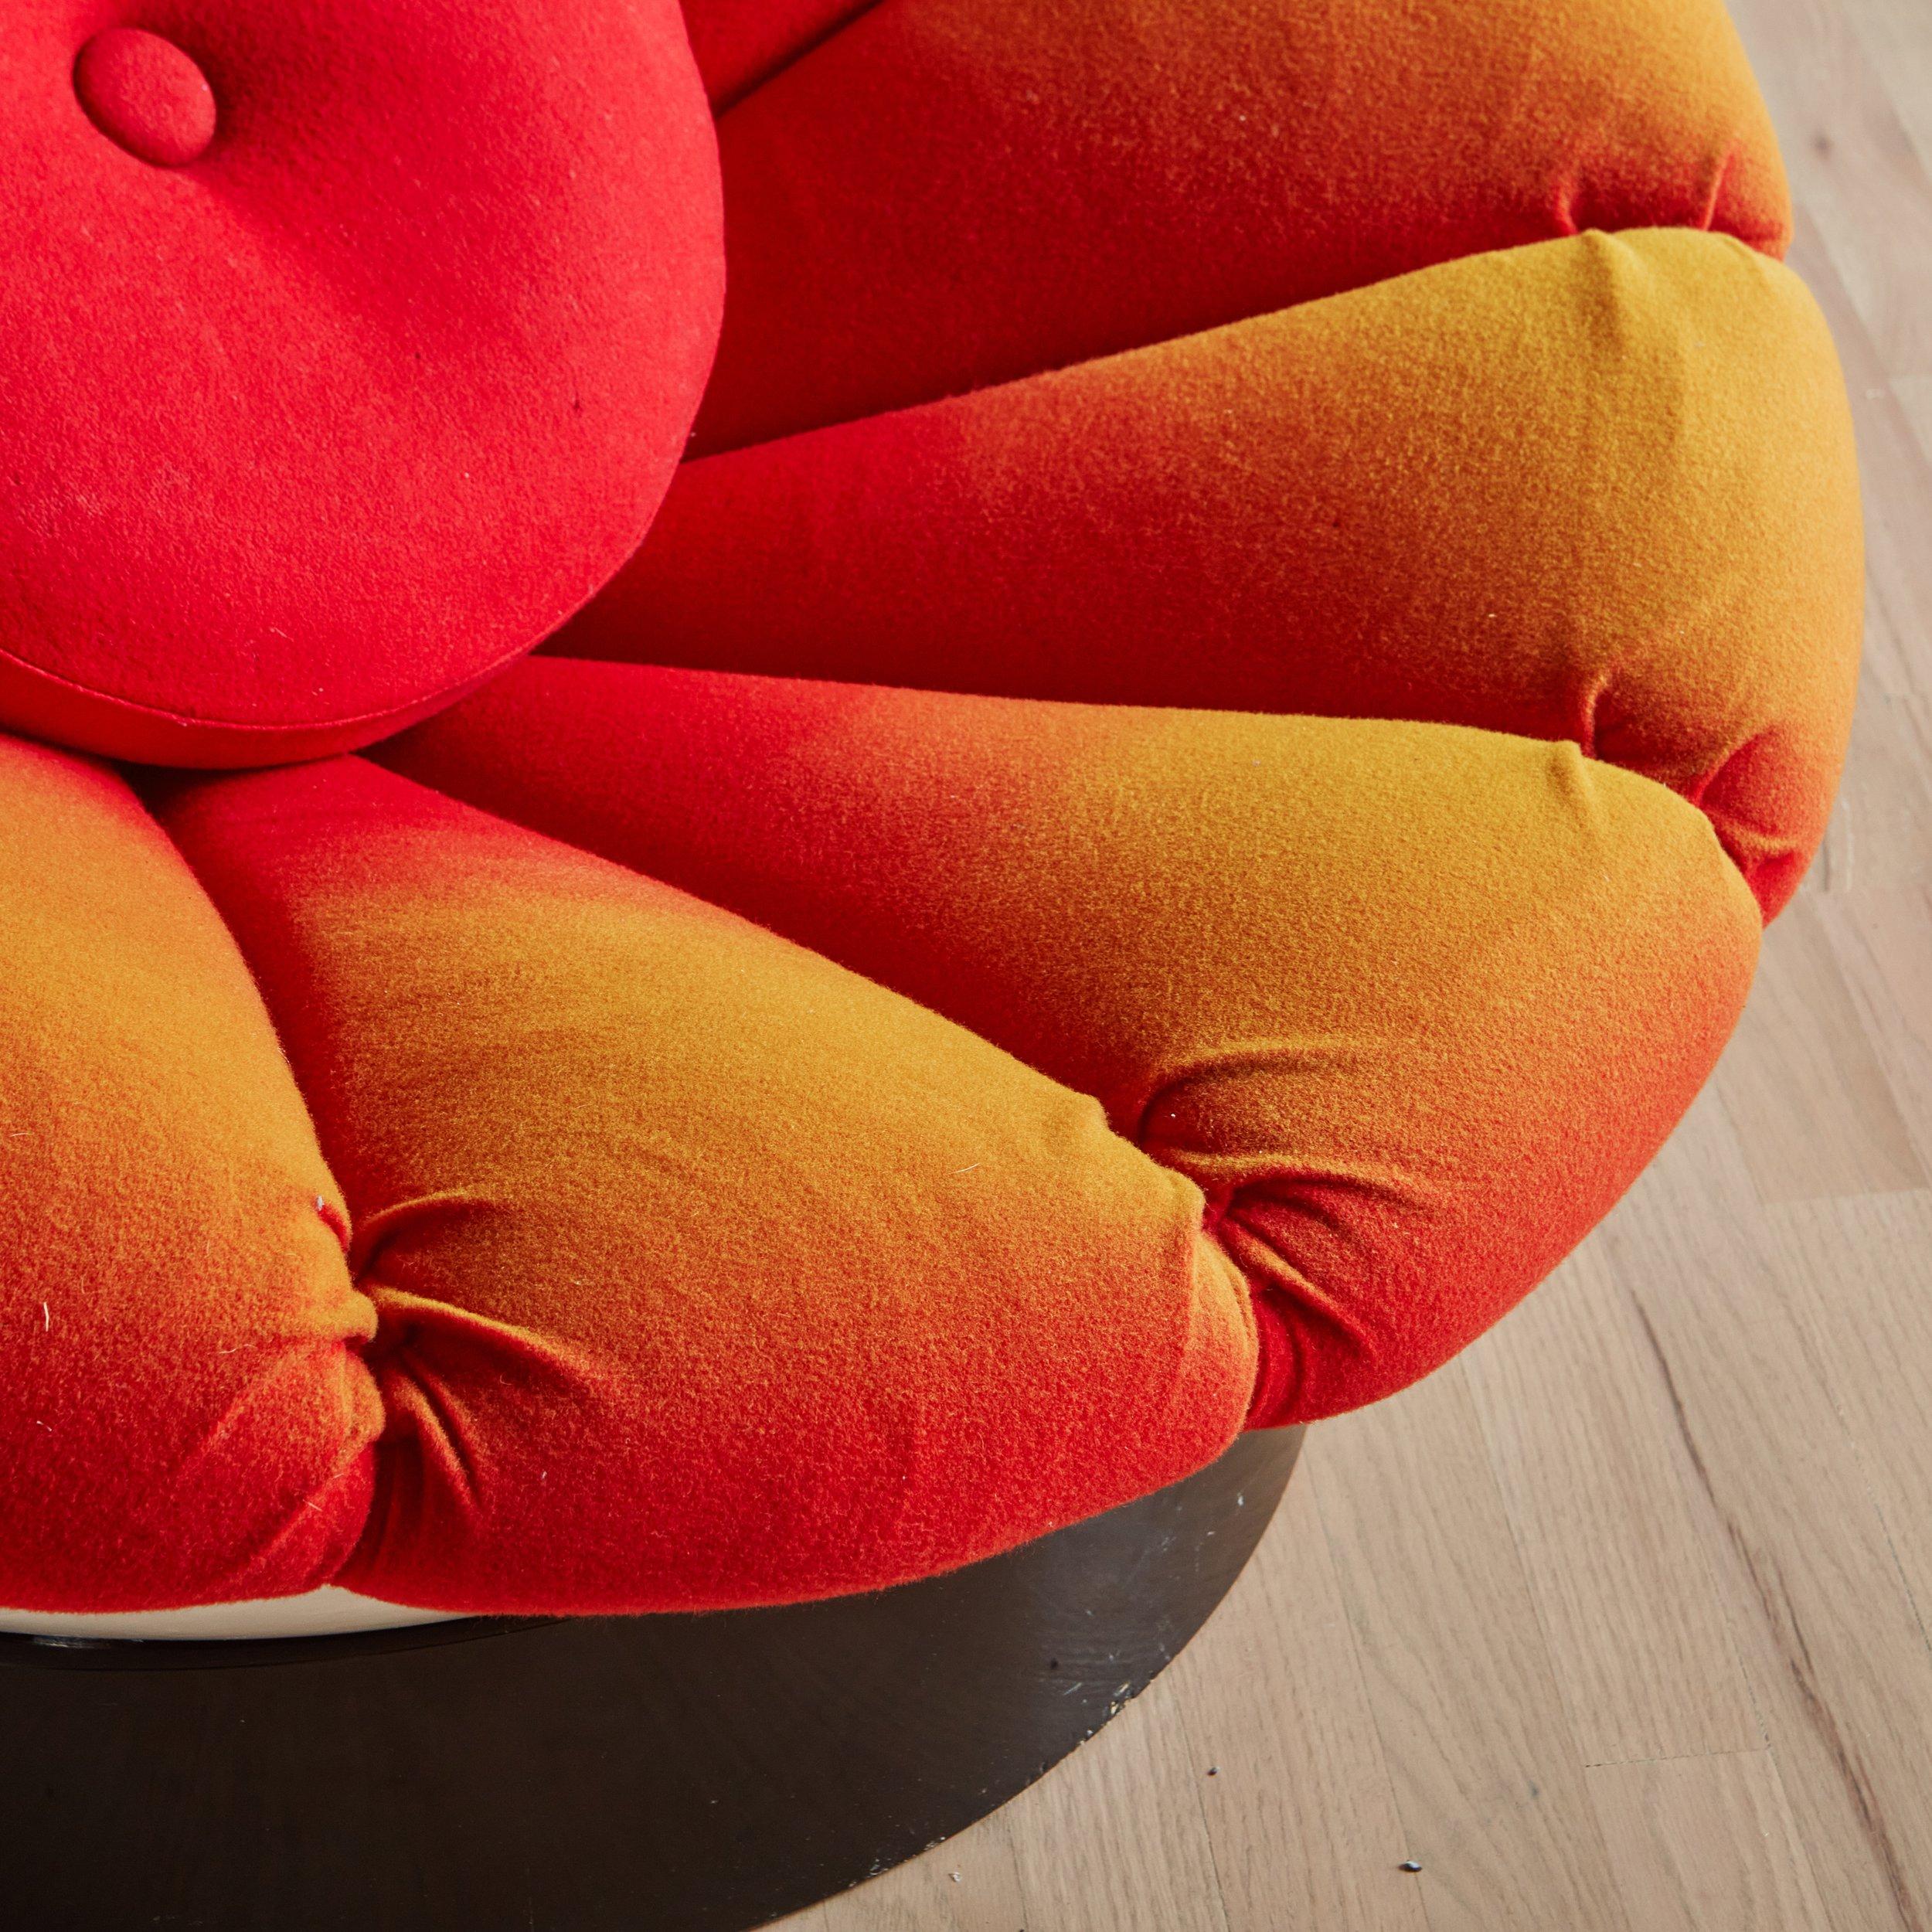 Upholstery Fiberglass ‘Girasole’ Chair with Pillow by Luciano Frigerio, Italy 1960s For Sale